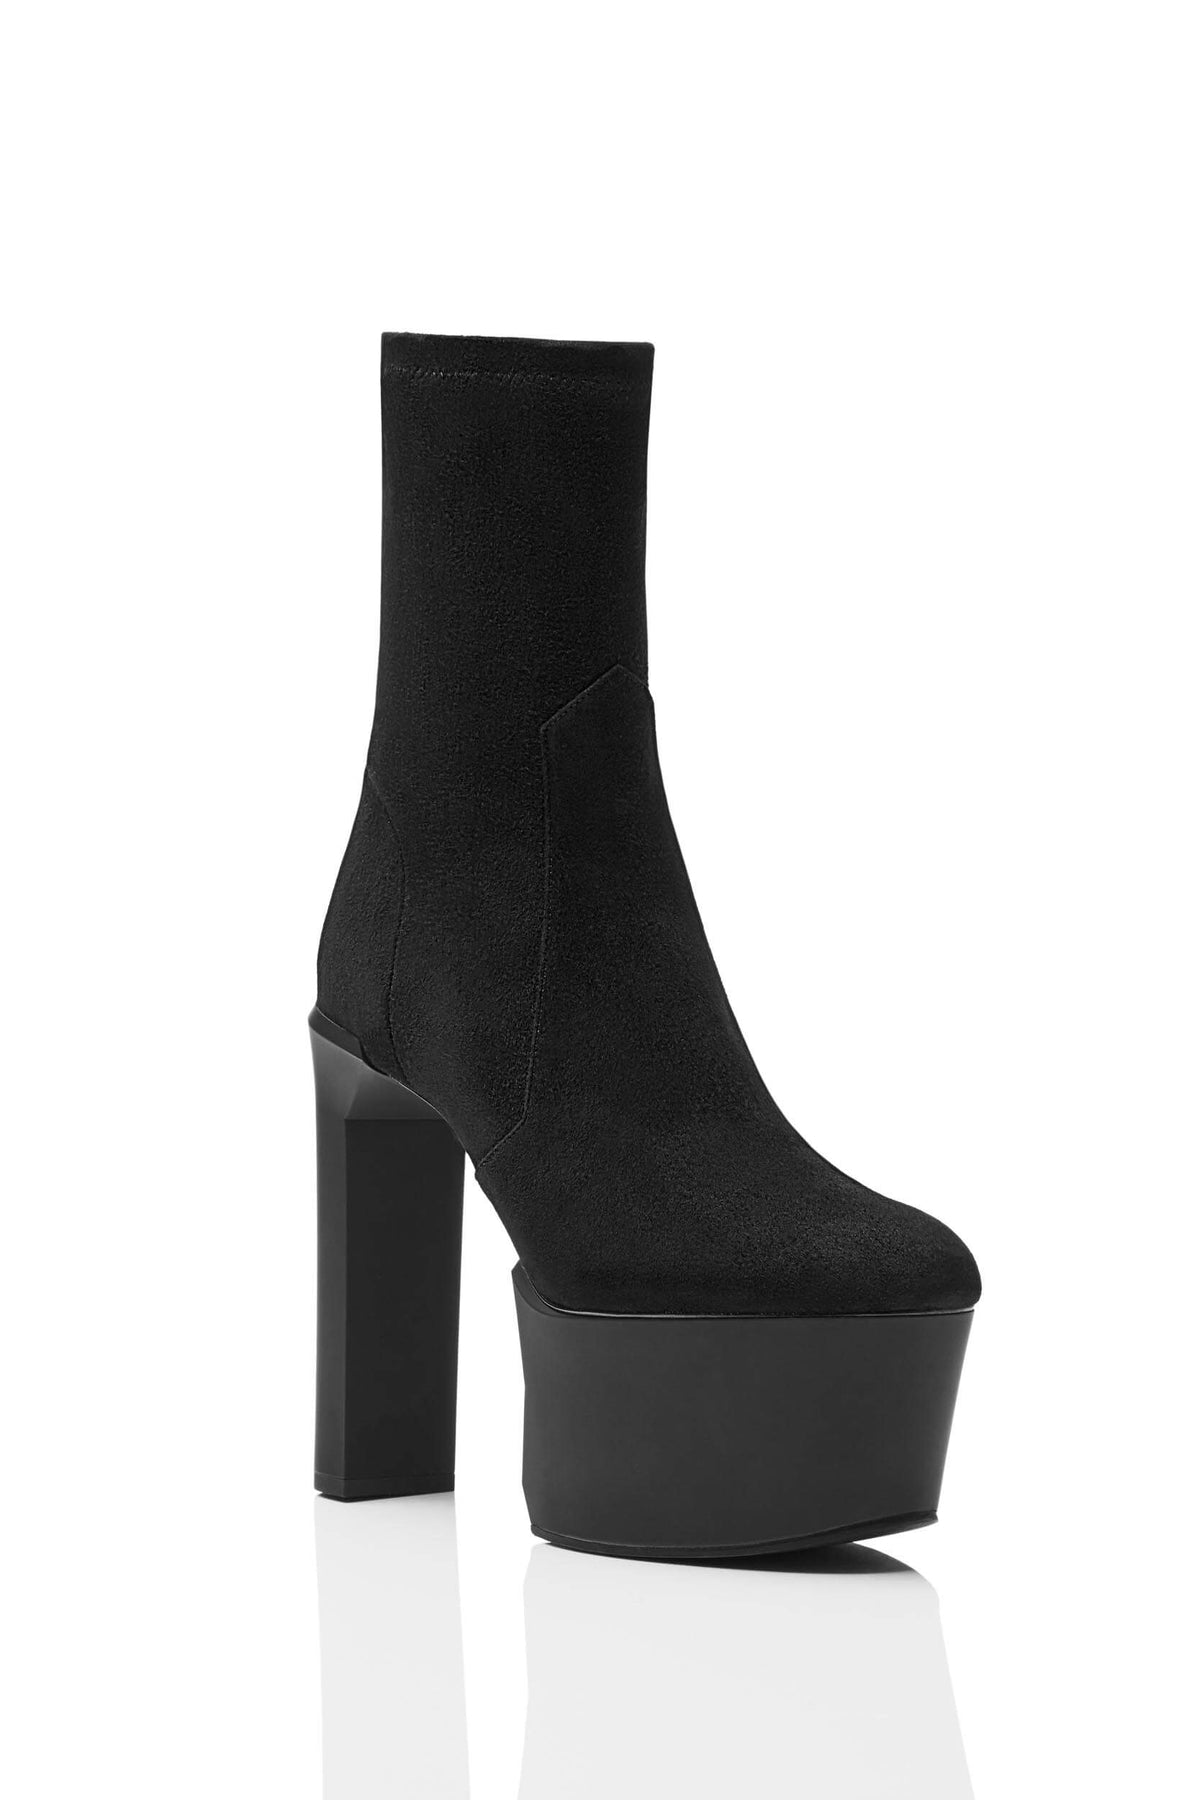 HAIKI 851 – Stretch pull-on platform boot with chic, almond shape toe. Made of Kidsuede in black. 